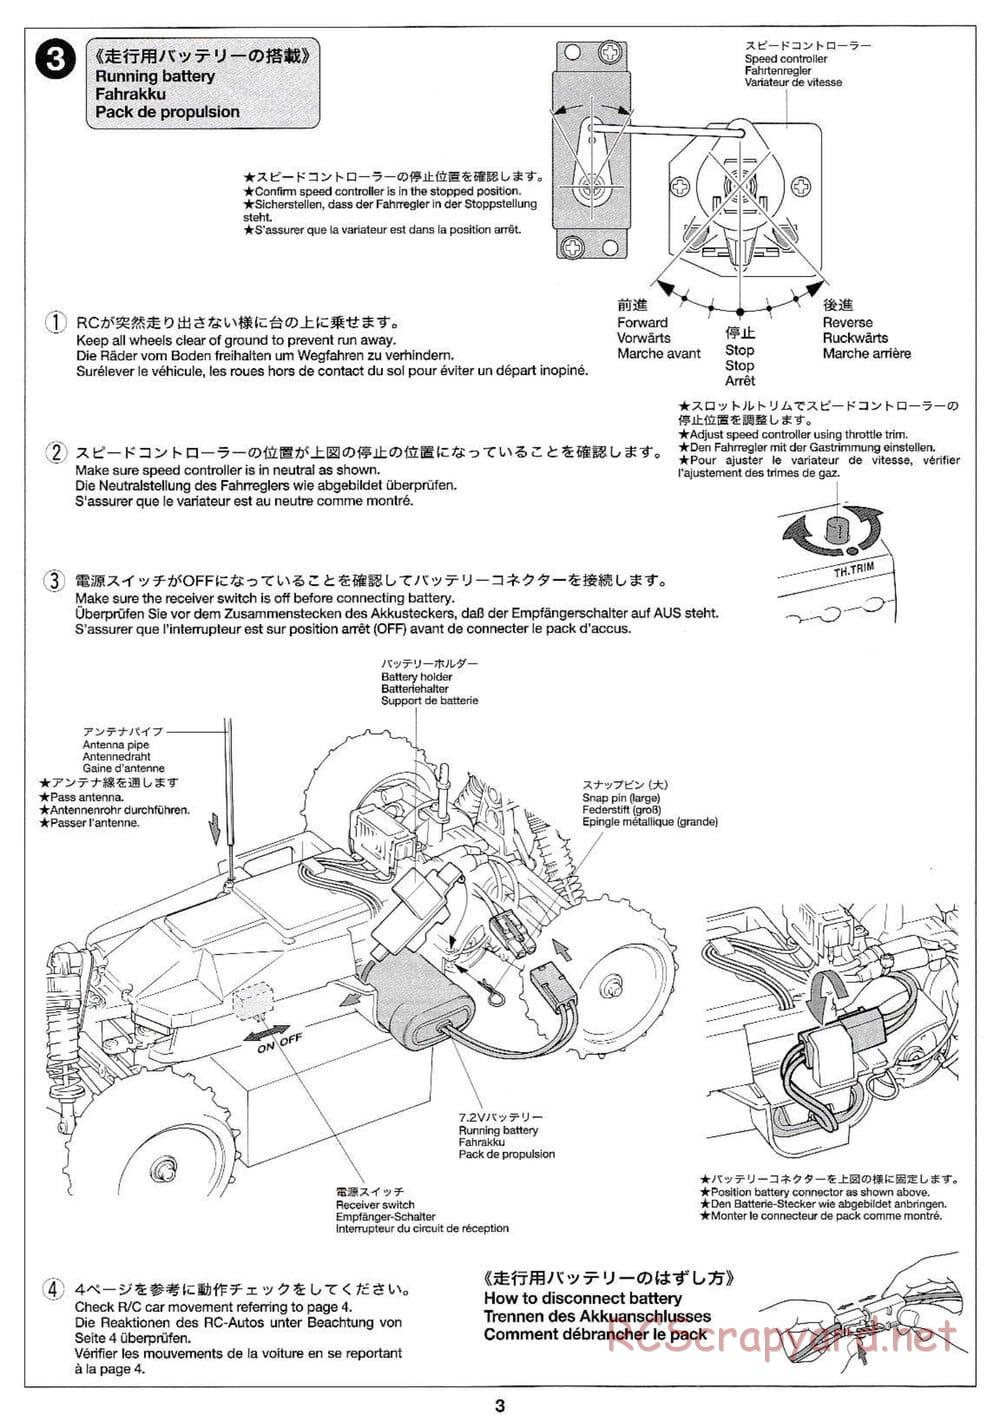 Tamiya - XB Neo Top-Force - DF-01 Chassis - Manual - Page 3